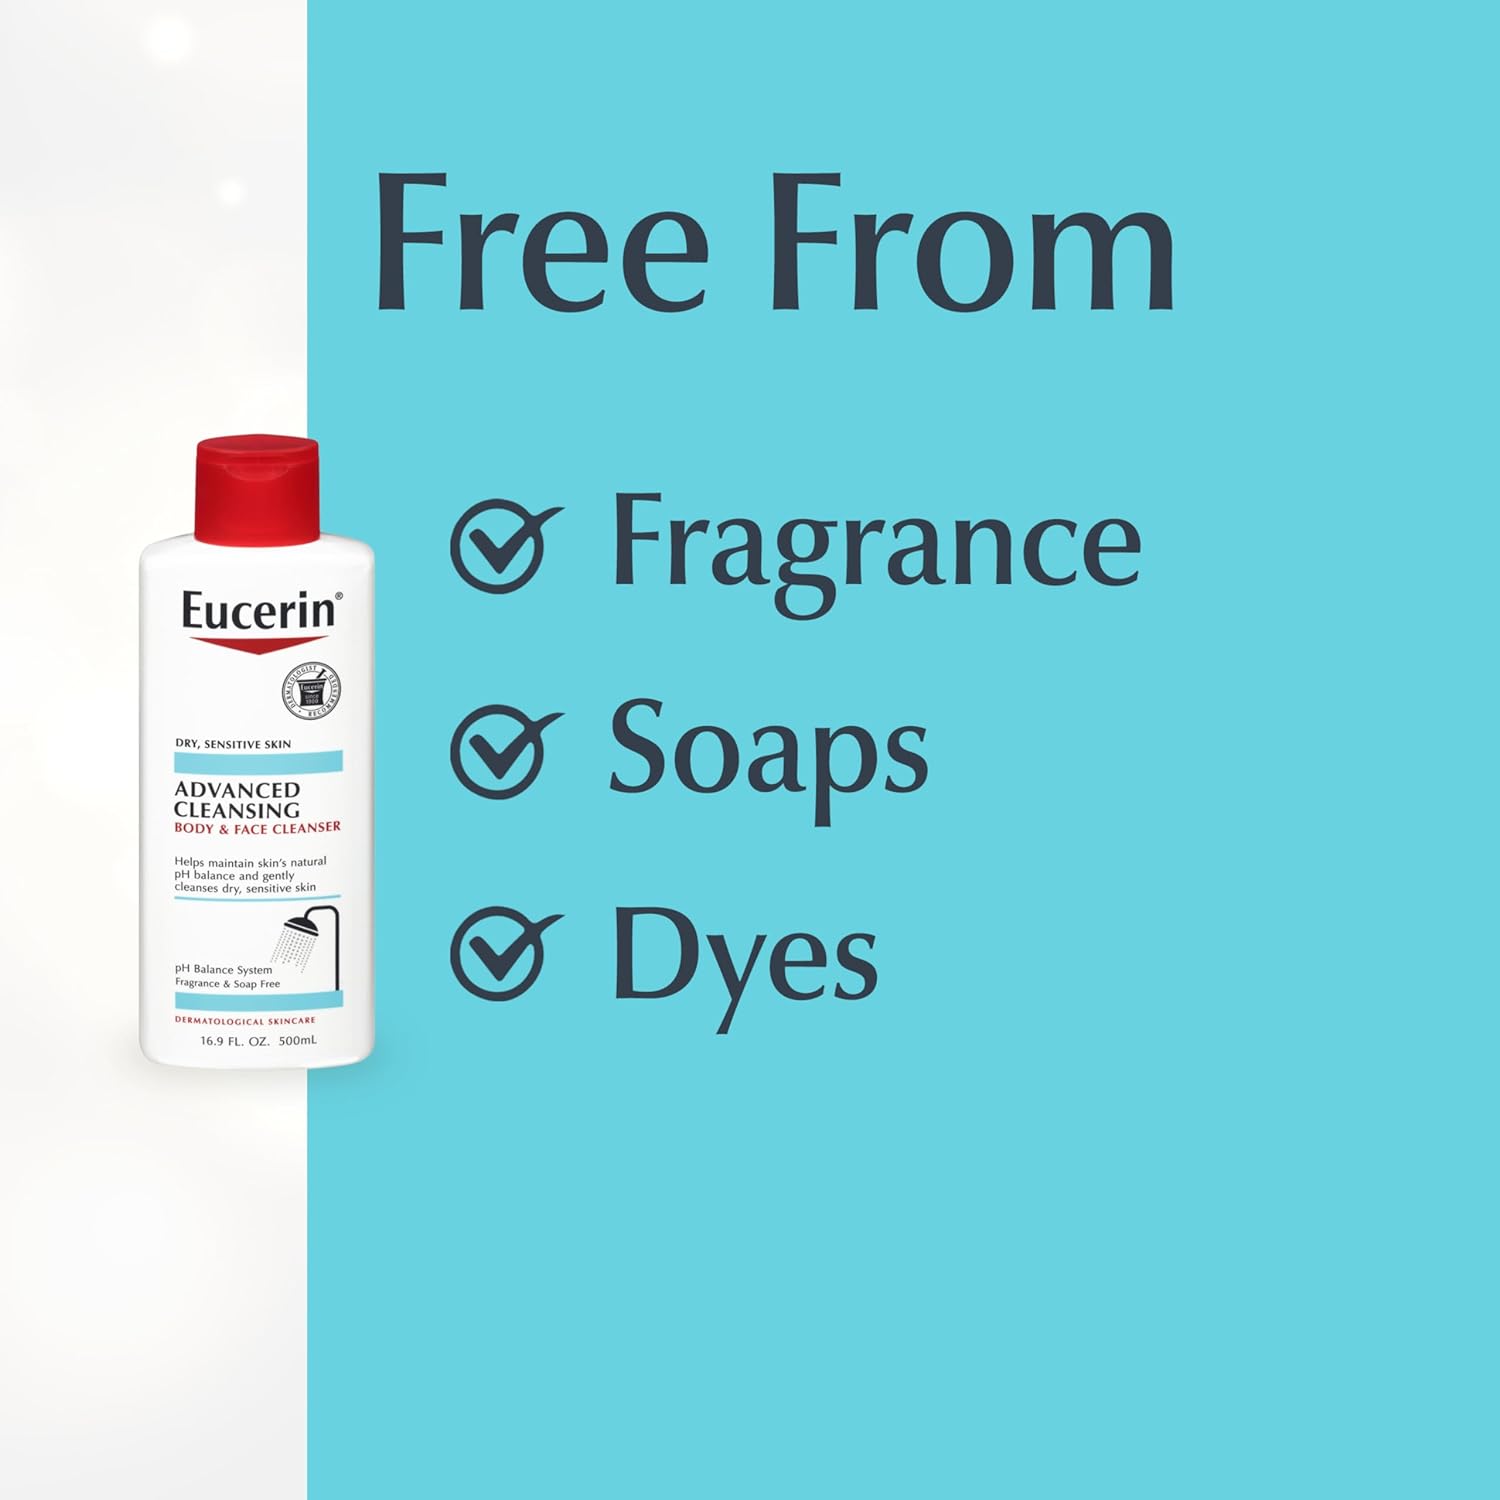 Eucerin Advanced Cleansing Body & Face Cleanser - Fragrance & Soap Free for Dry, Sensitive Skin - 16.9 fl. oz Bottle : Elbow Braces : Beauty & Personal Care